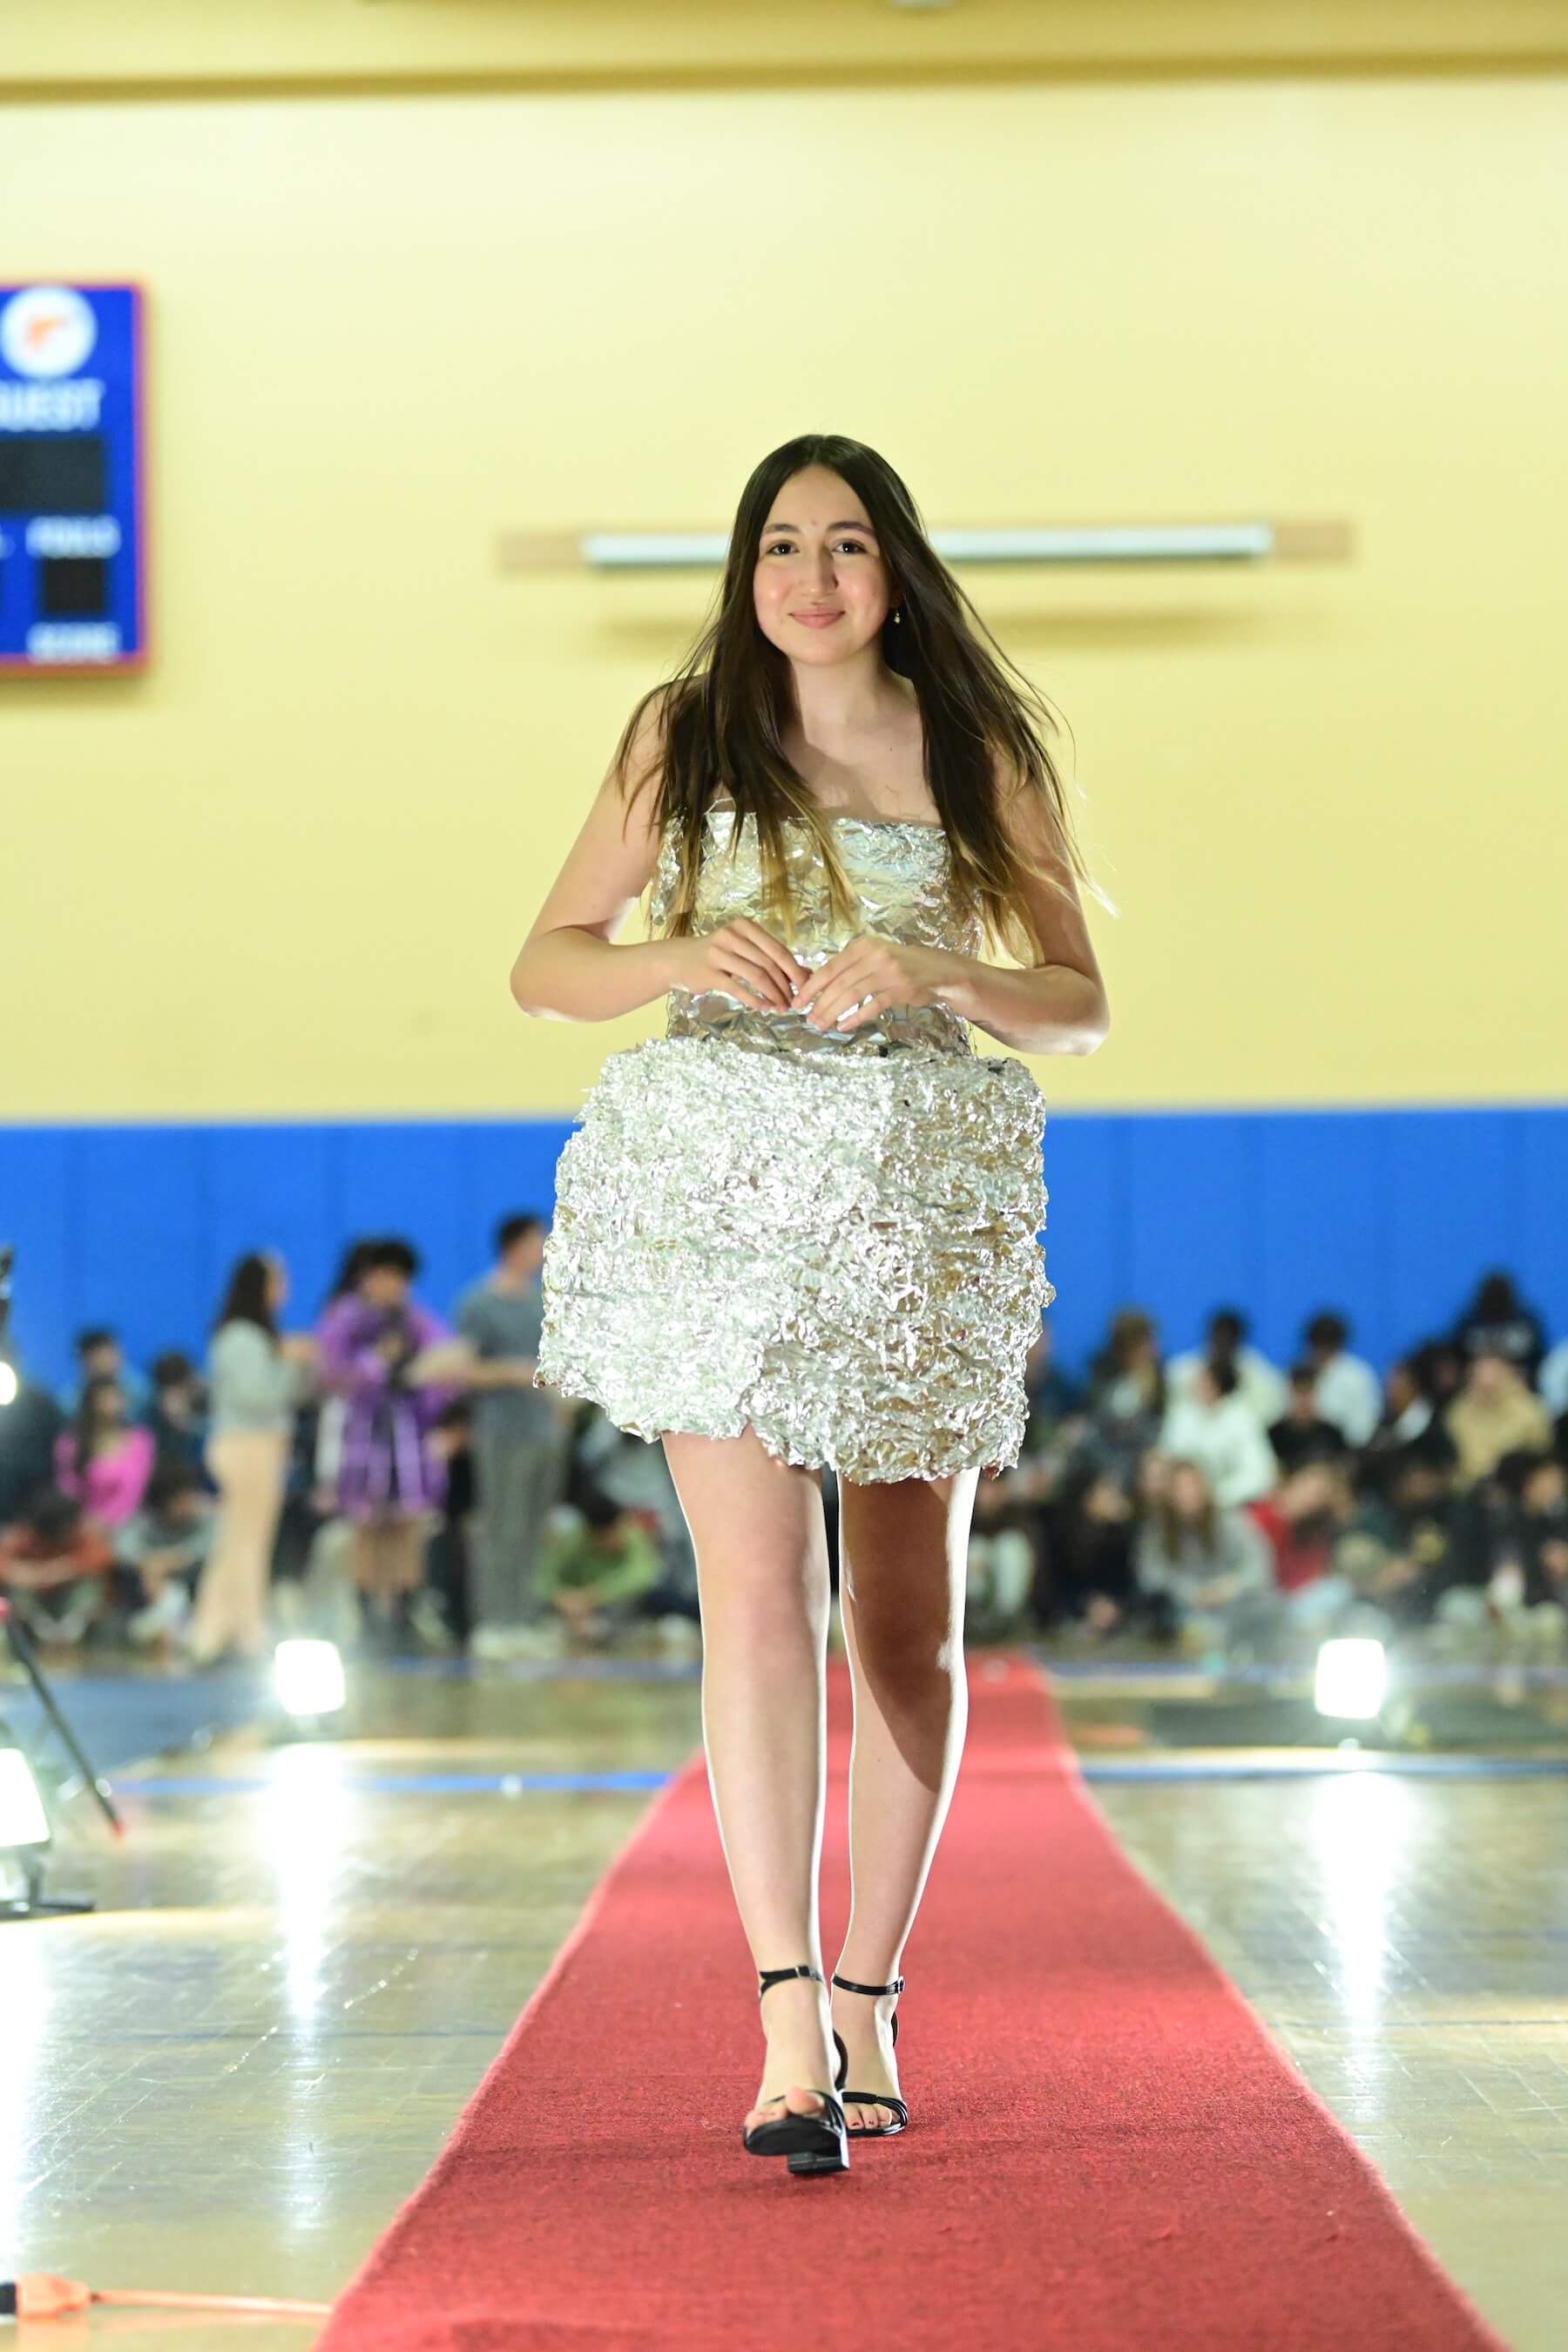 An Ethical Culture Fieldston Middle School student models at the Fashion Show.